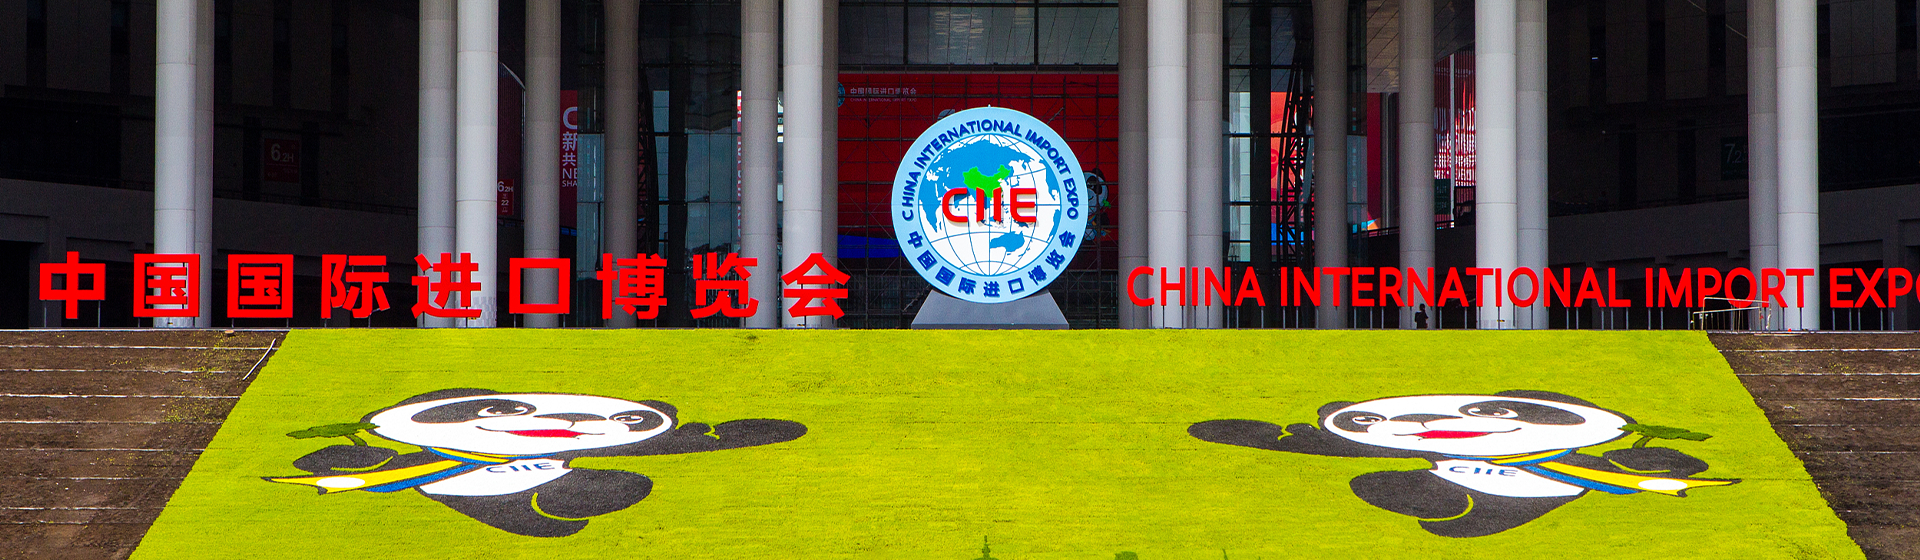 International companies sing praises on CIIE's excellence